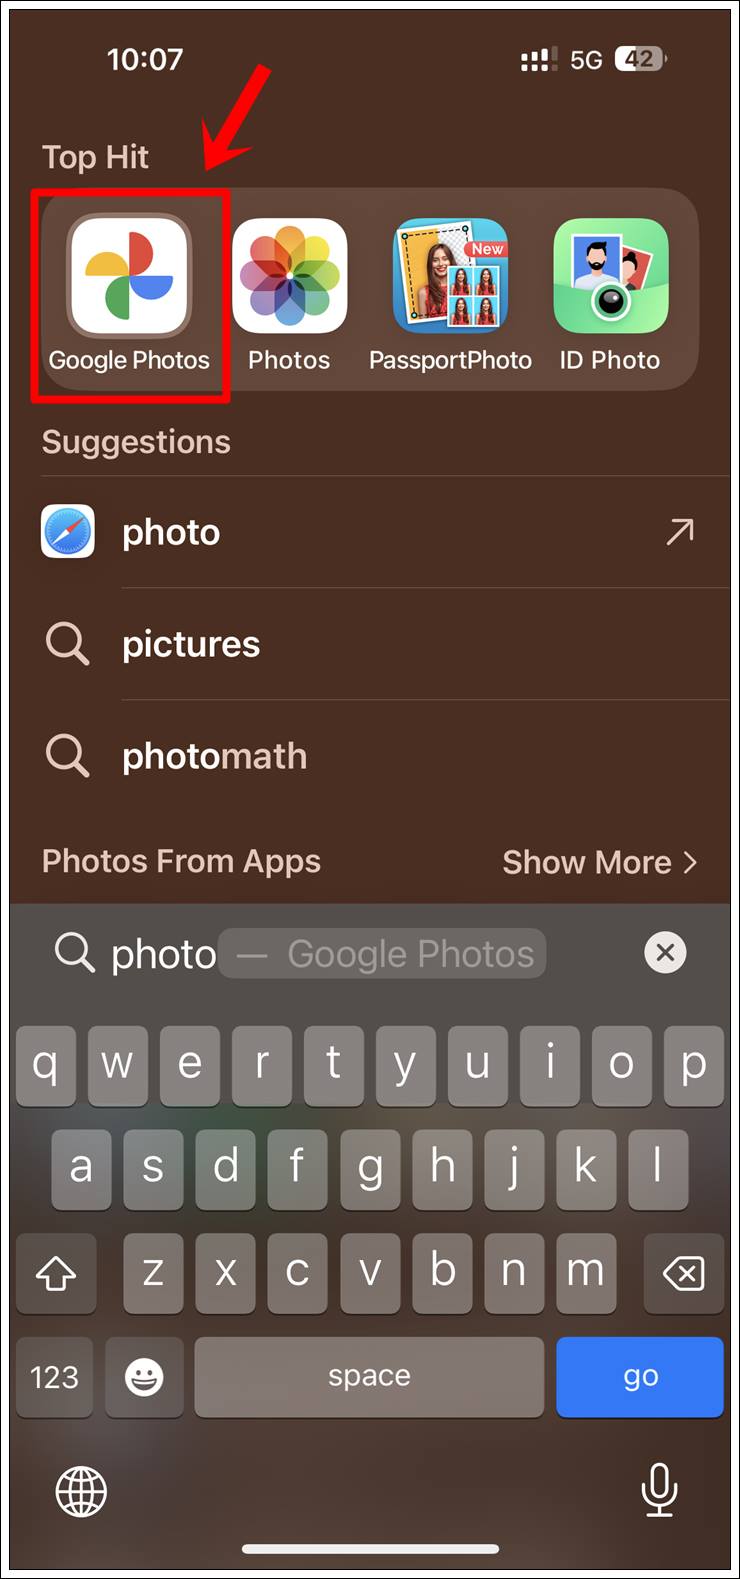 This image shows a screenshot of an iPhone with the Google Photos app icon highlighted.